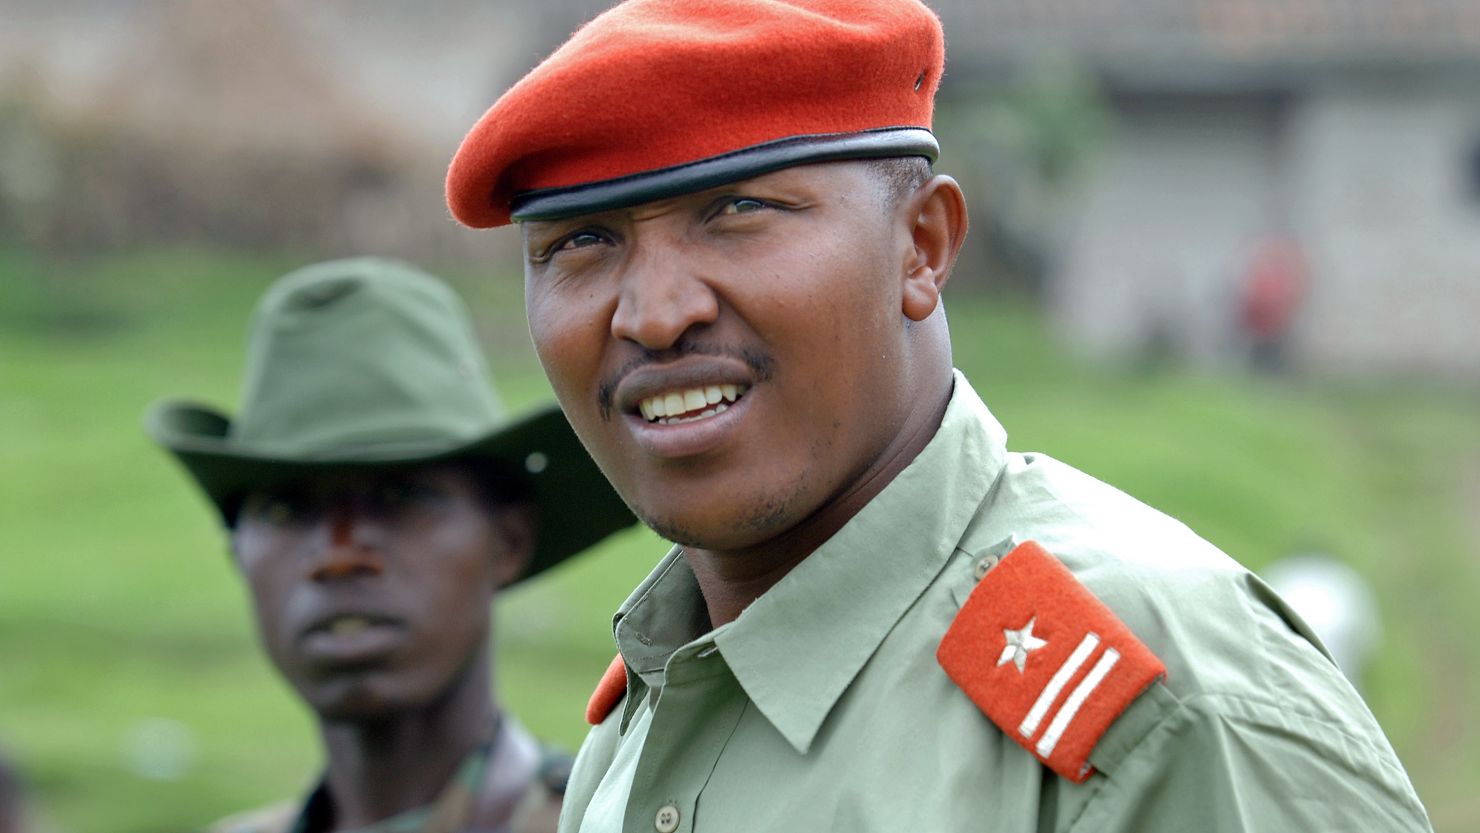 The International Criminal Court first issued an arrest warrant for Bosco Ntaganda in 2006. 